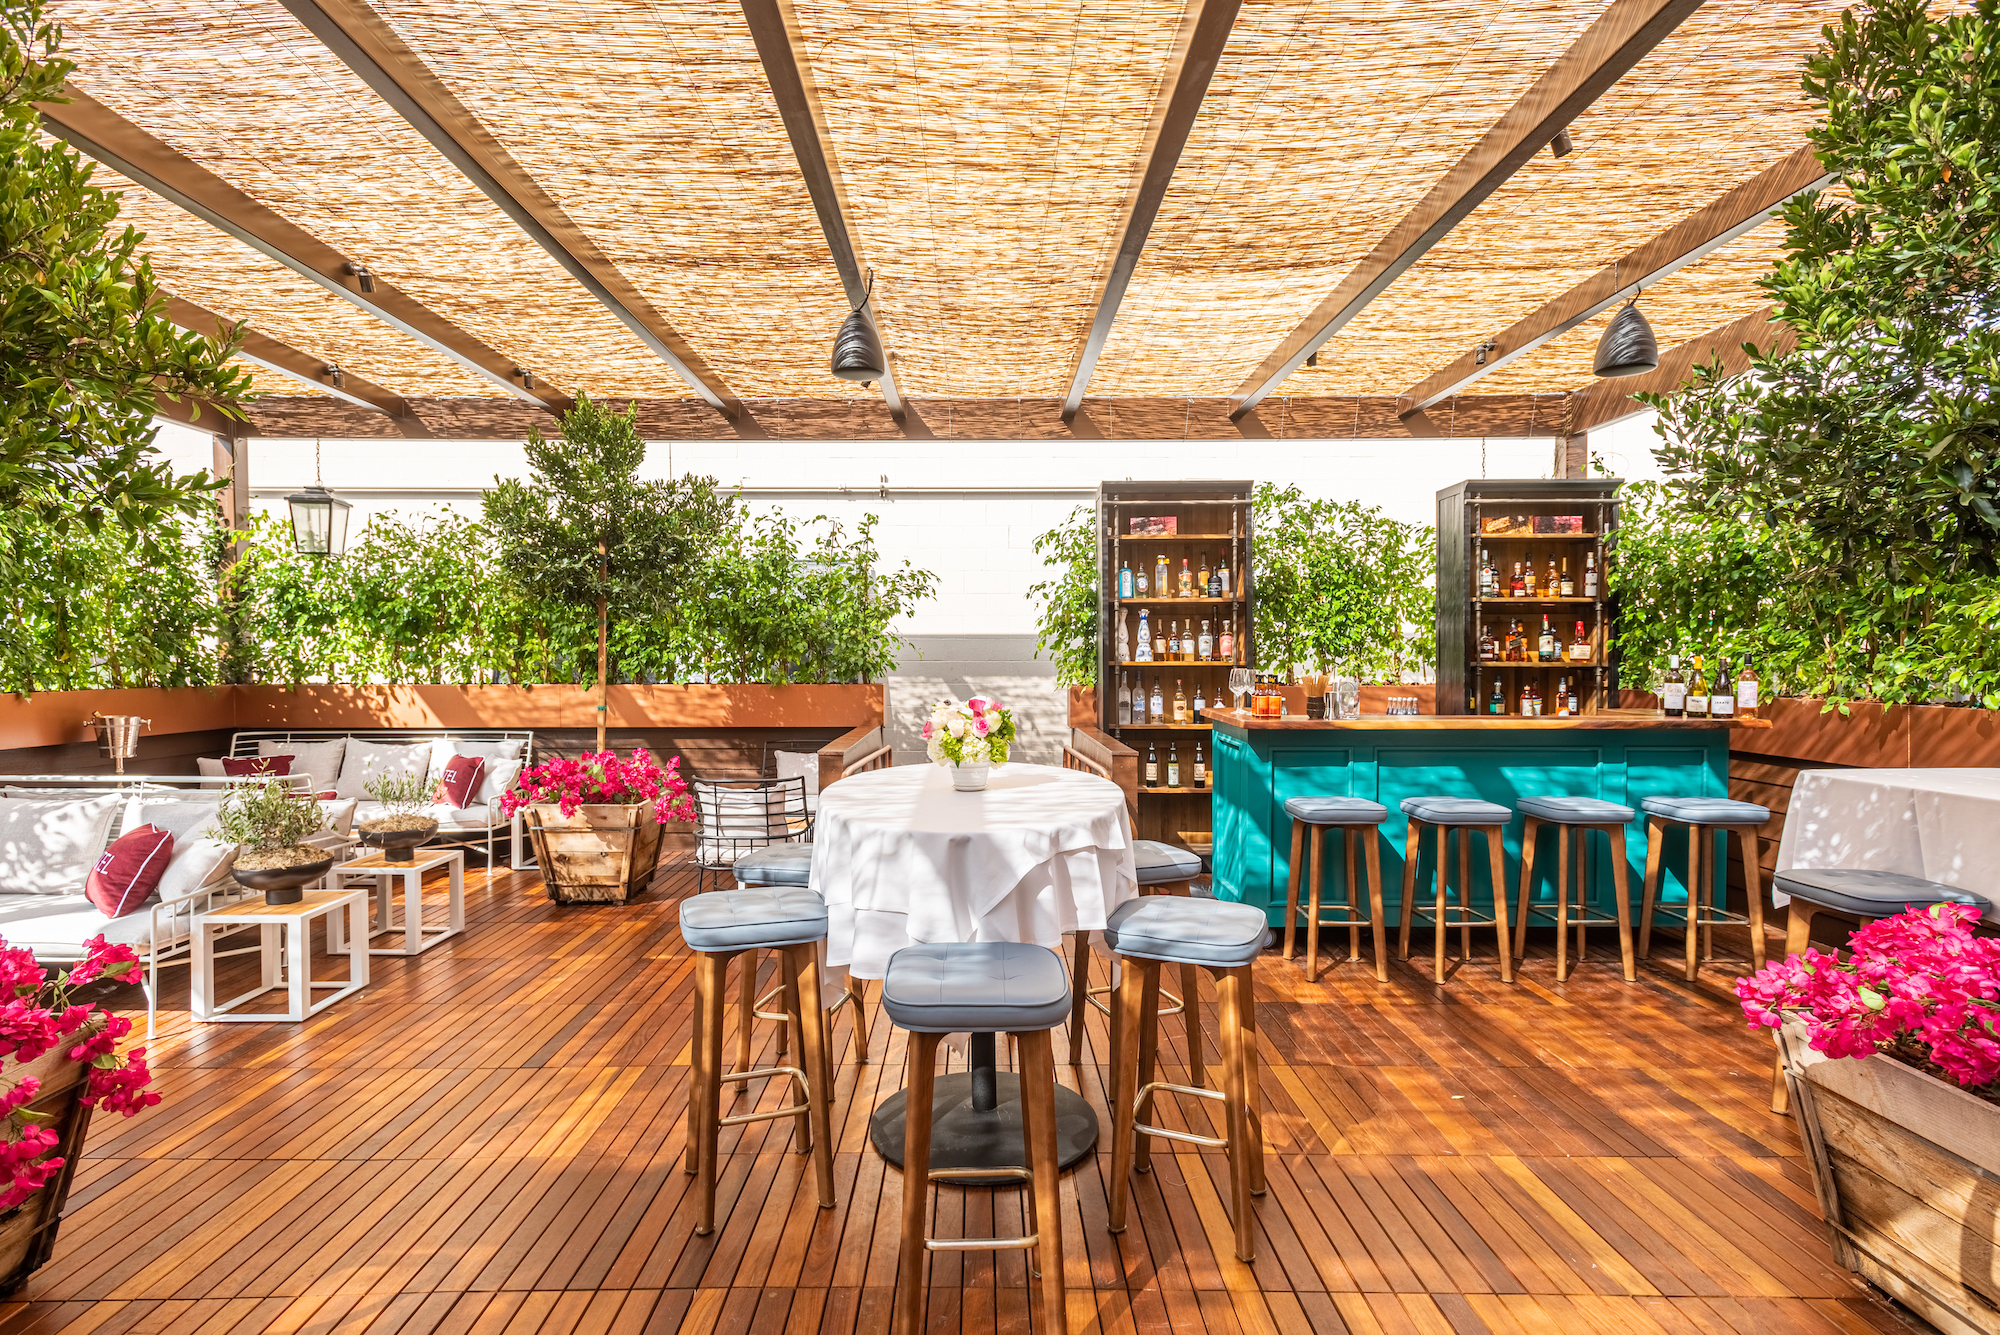 A daytime patio shaded from the sun with wood planks beneath, a teal bar, and lounge areas.